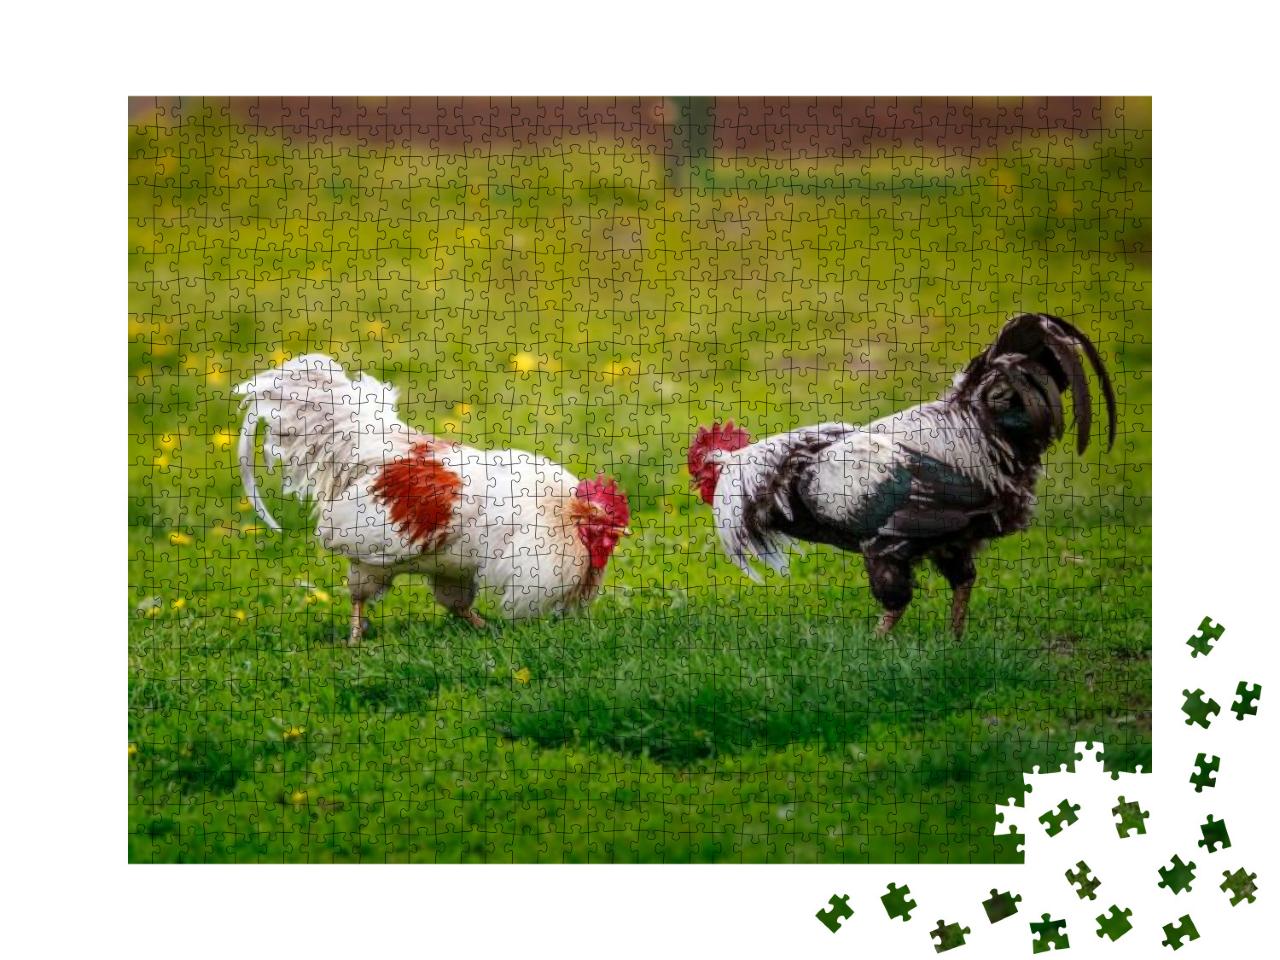 Two Roosters Black & White Fight on the Green Grass in th... Jigsaw Puzzle with 1000 pieces